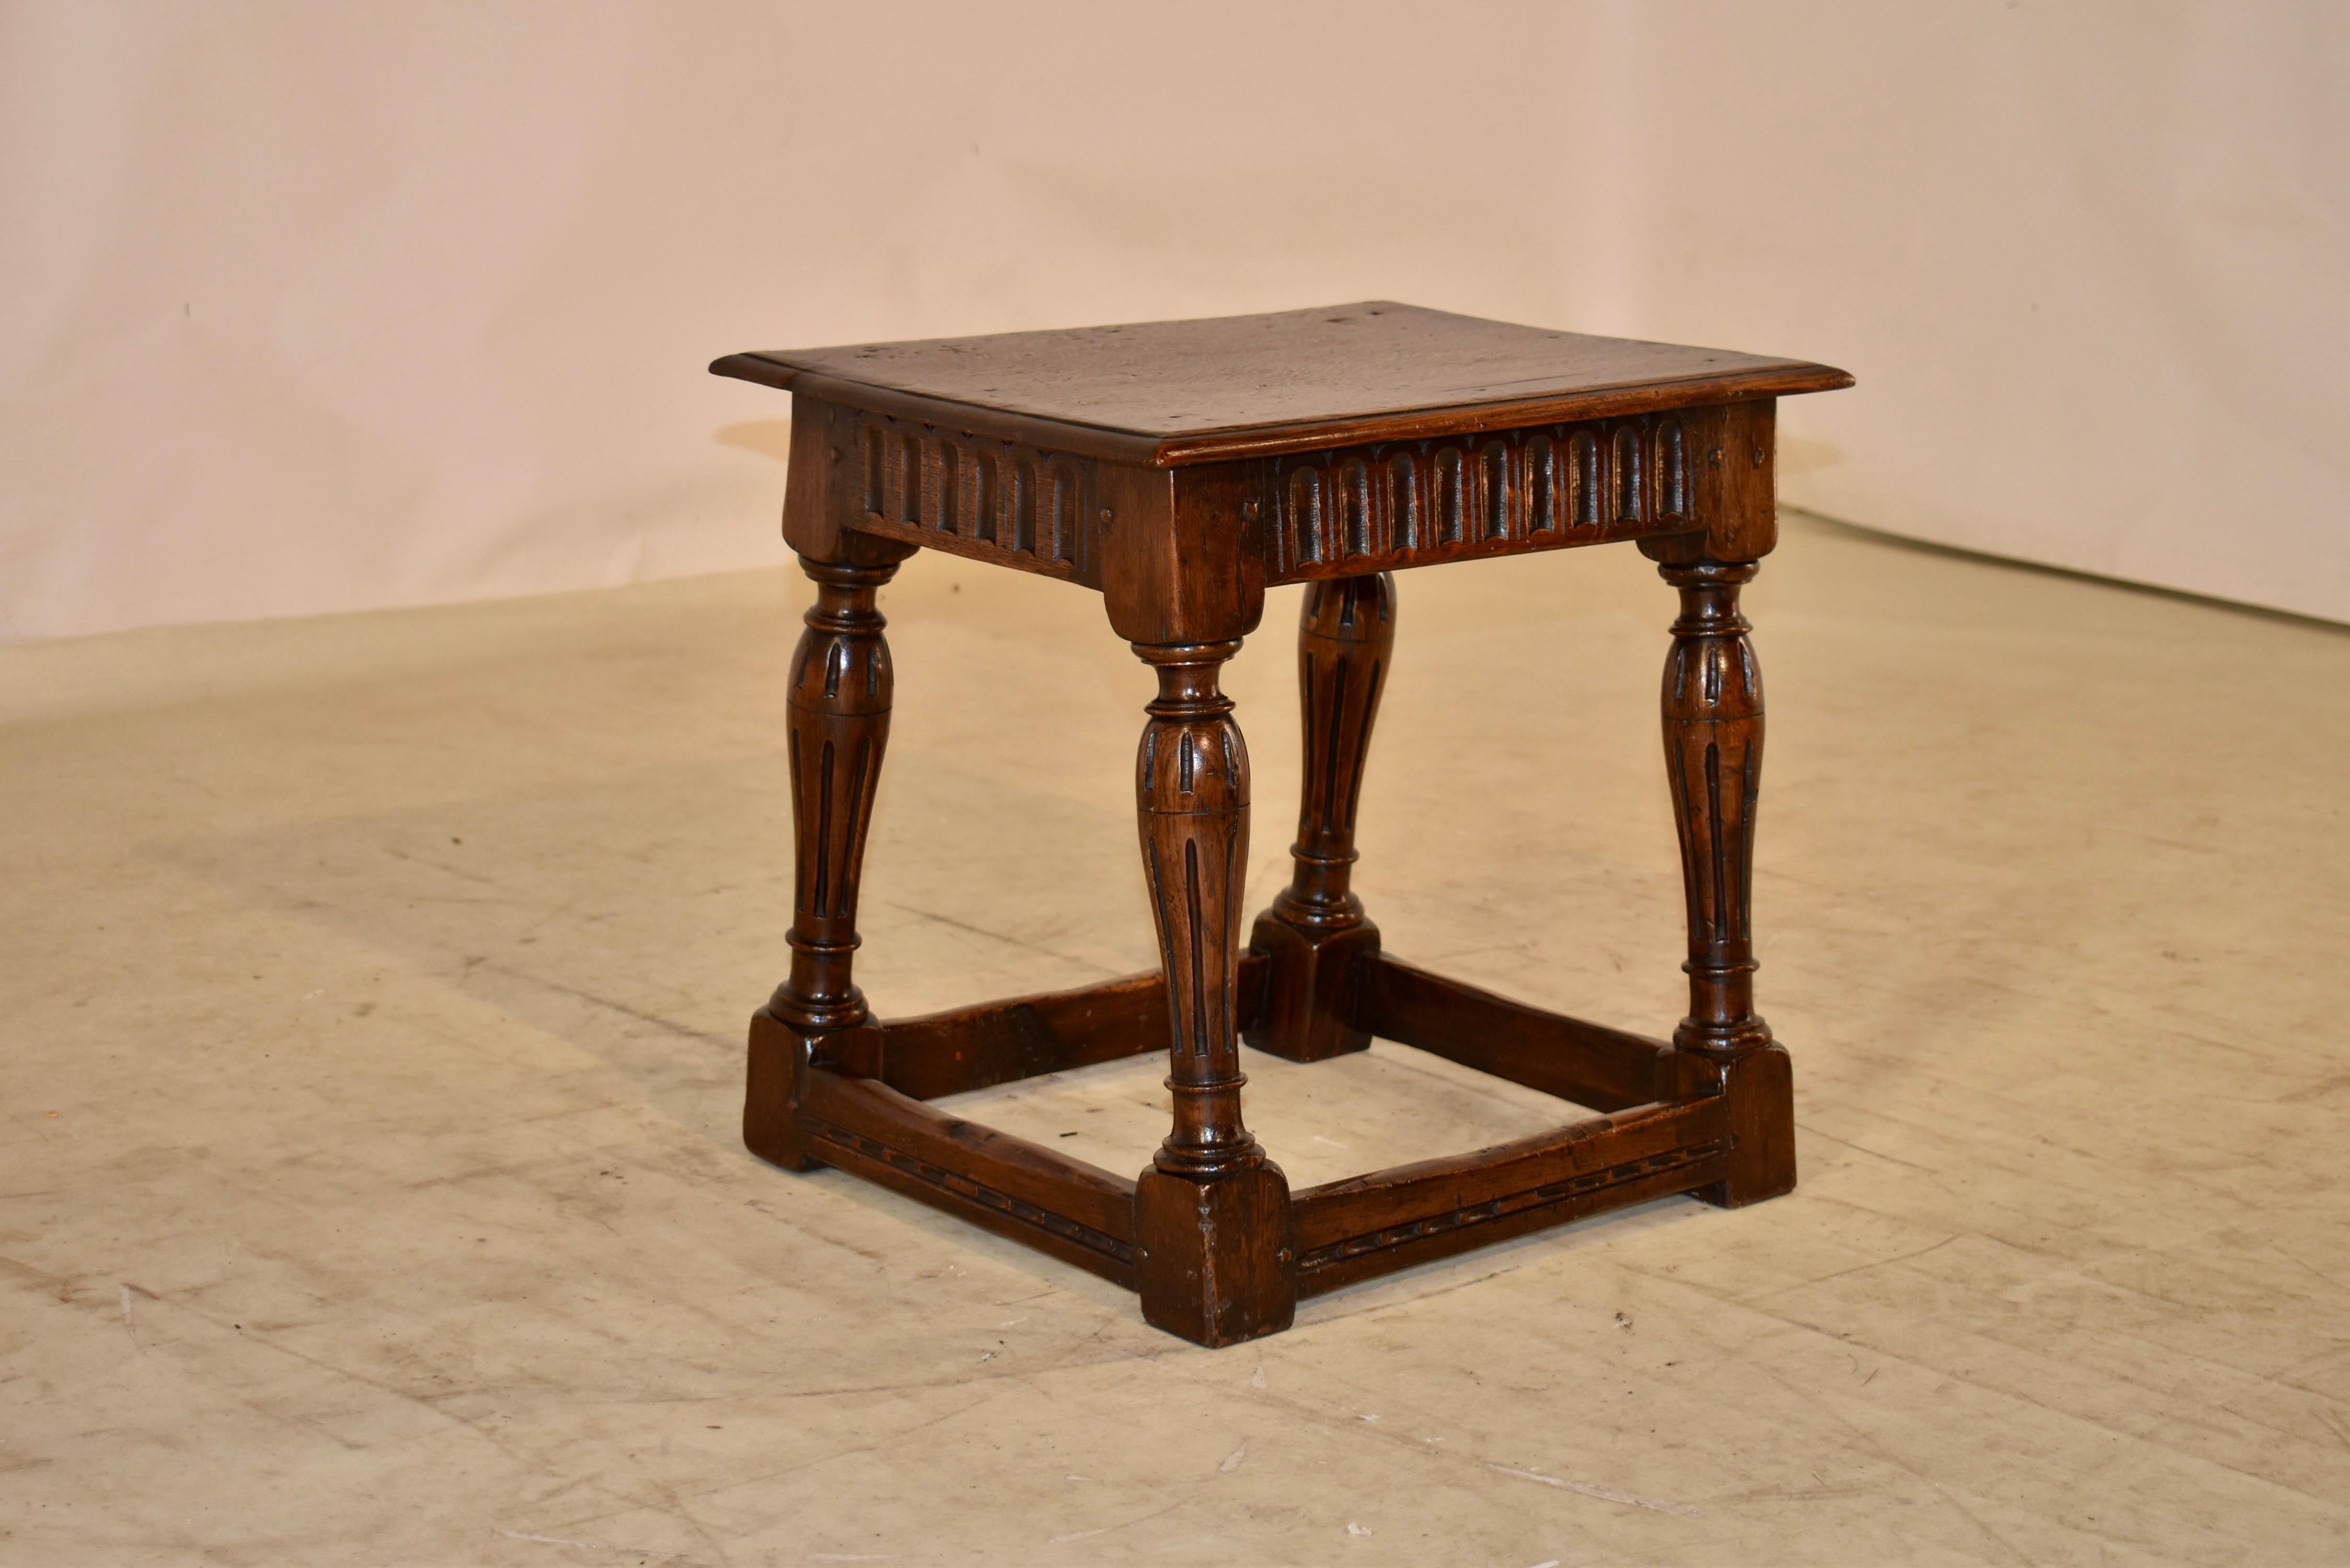 18th century oak joint stool from England with a single plank top with pegged construction. This follows down to a hand carved apron with nulling decoration and supported on hand turned and slightly splayed legs. The legs are fluted as well, and are